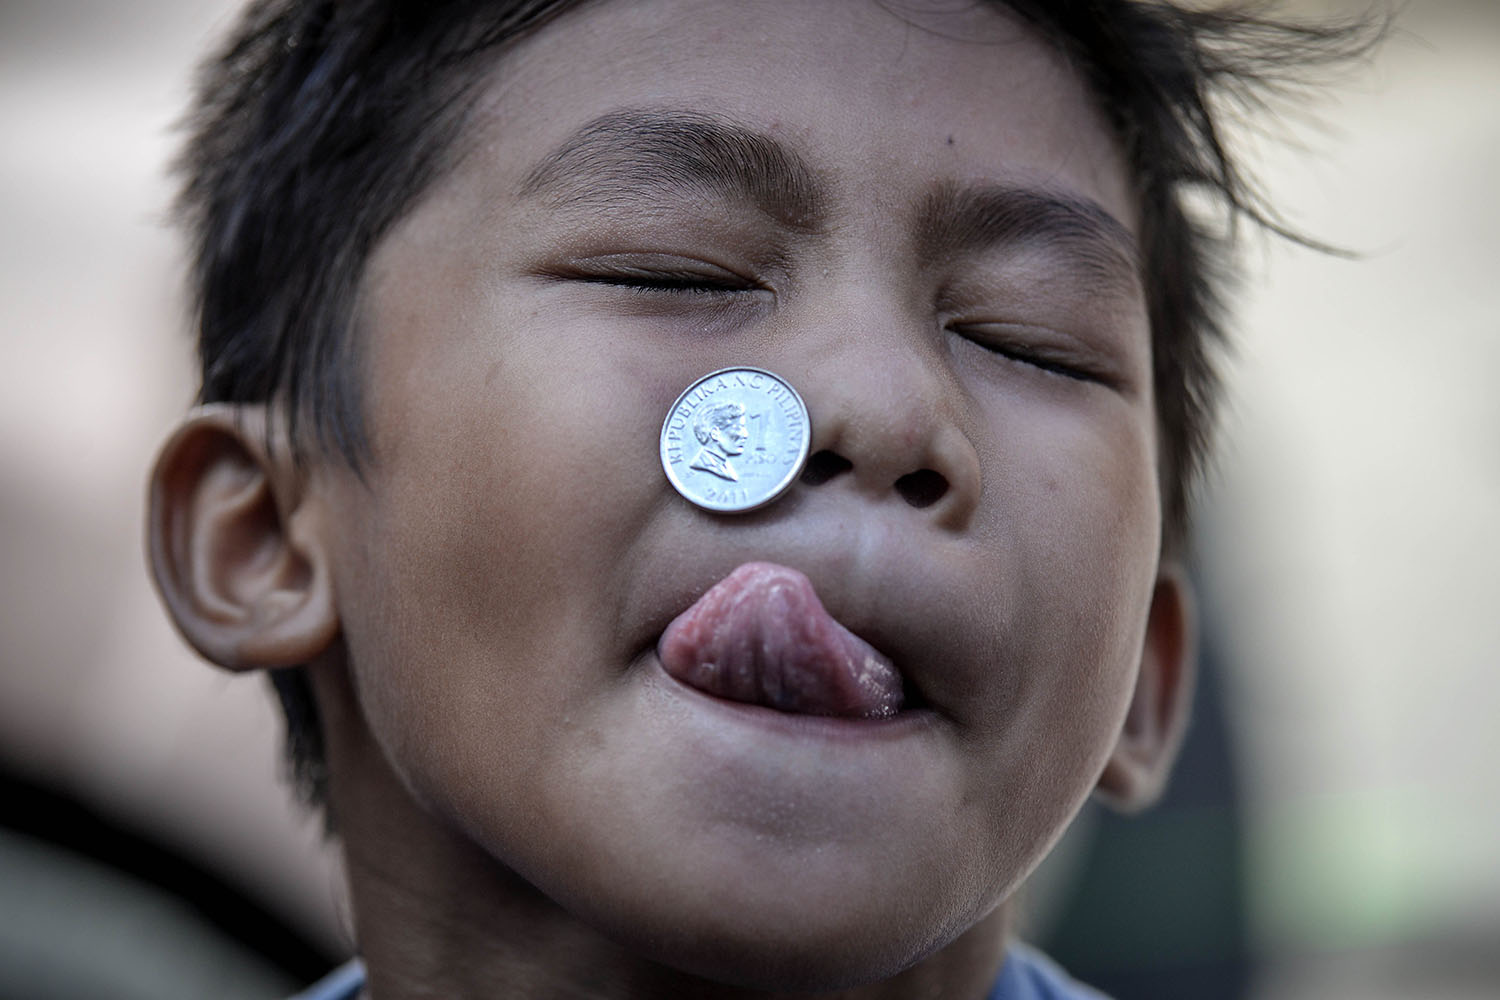 A boy contorts his face as he competes in a parlor game trying to move a coin from his forehead to his mouth as part of the feast day of Saint Rita of Cascia in Paranaque, Philippines, on May 18, 2014.